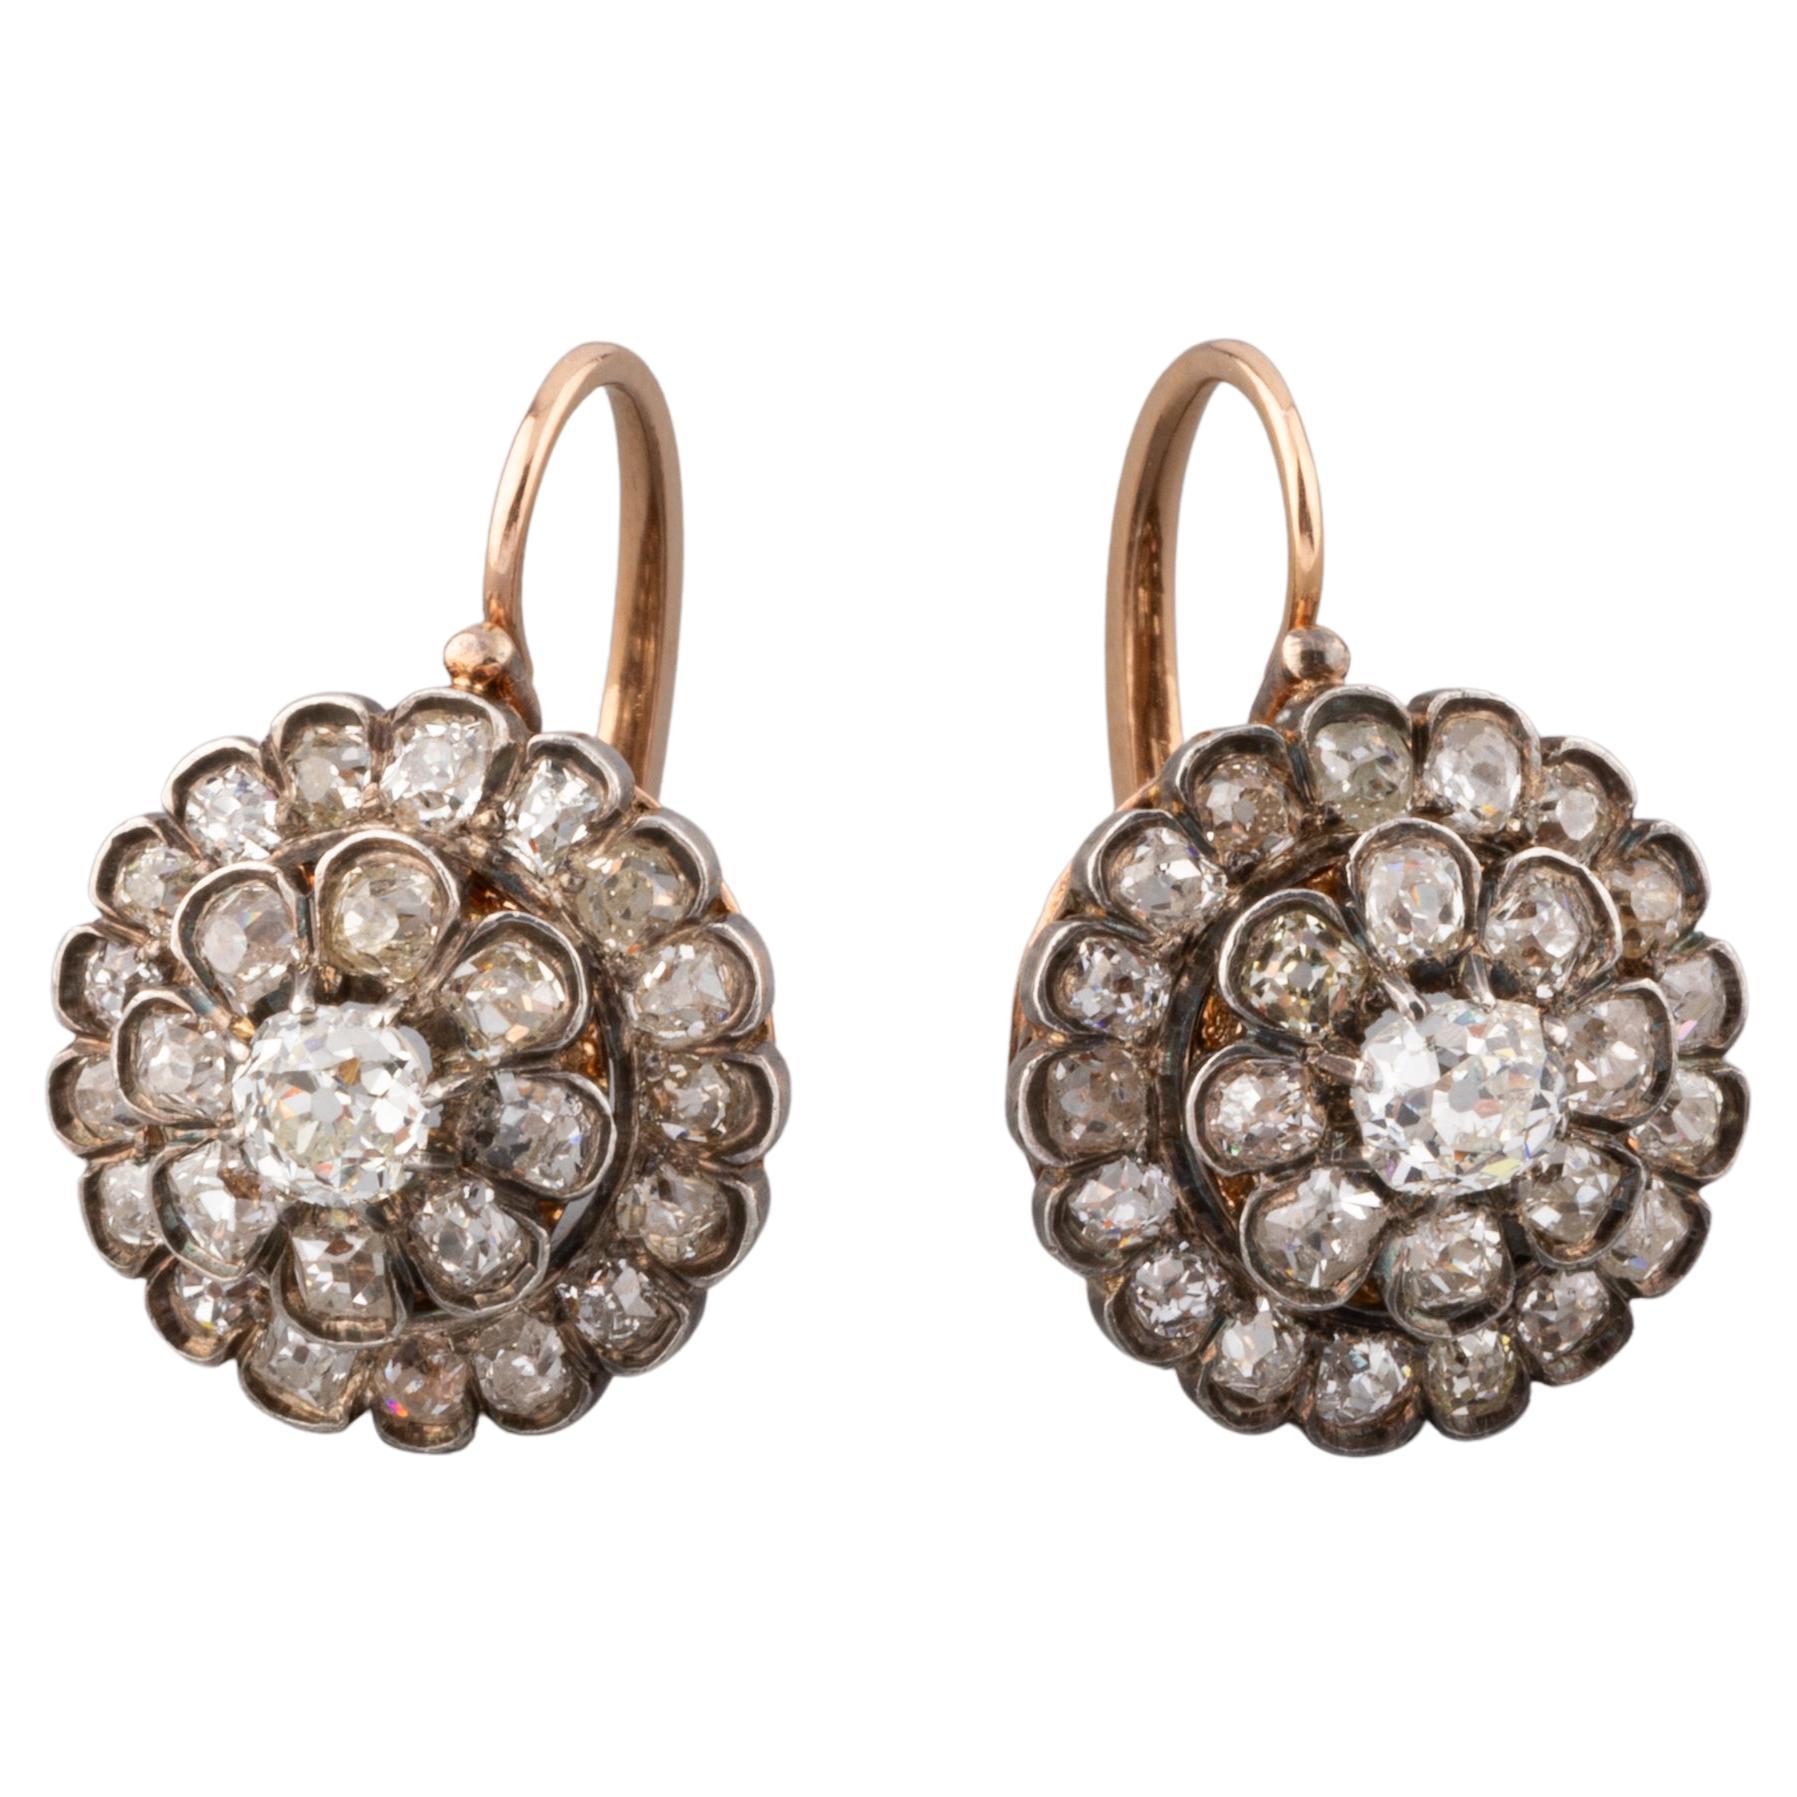 5 Carats Diamonds Antique French Earrings For Sale